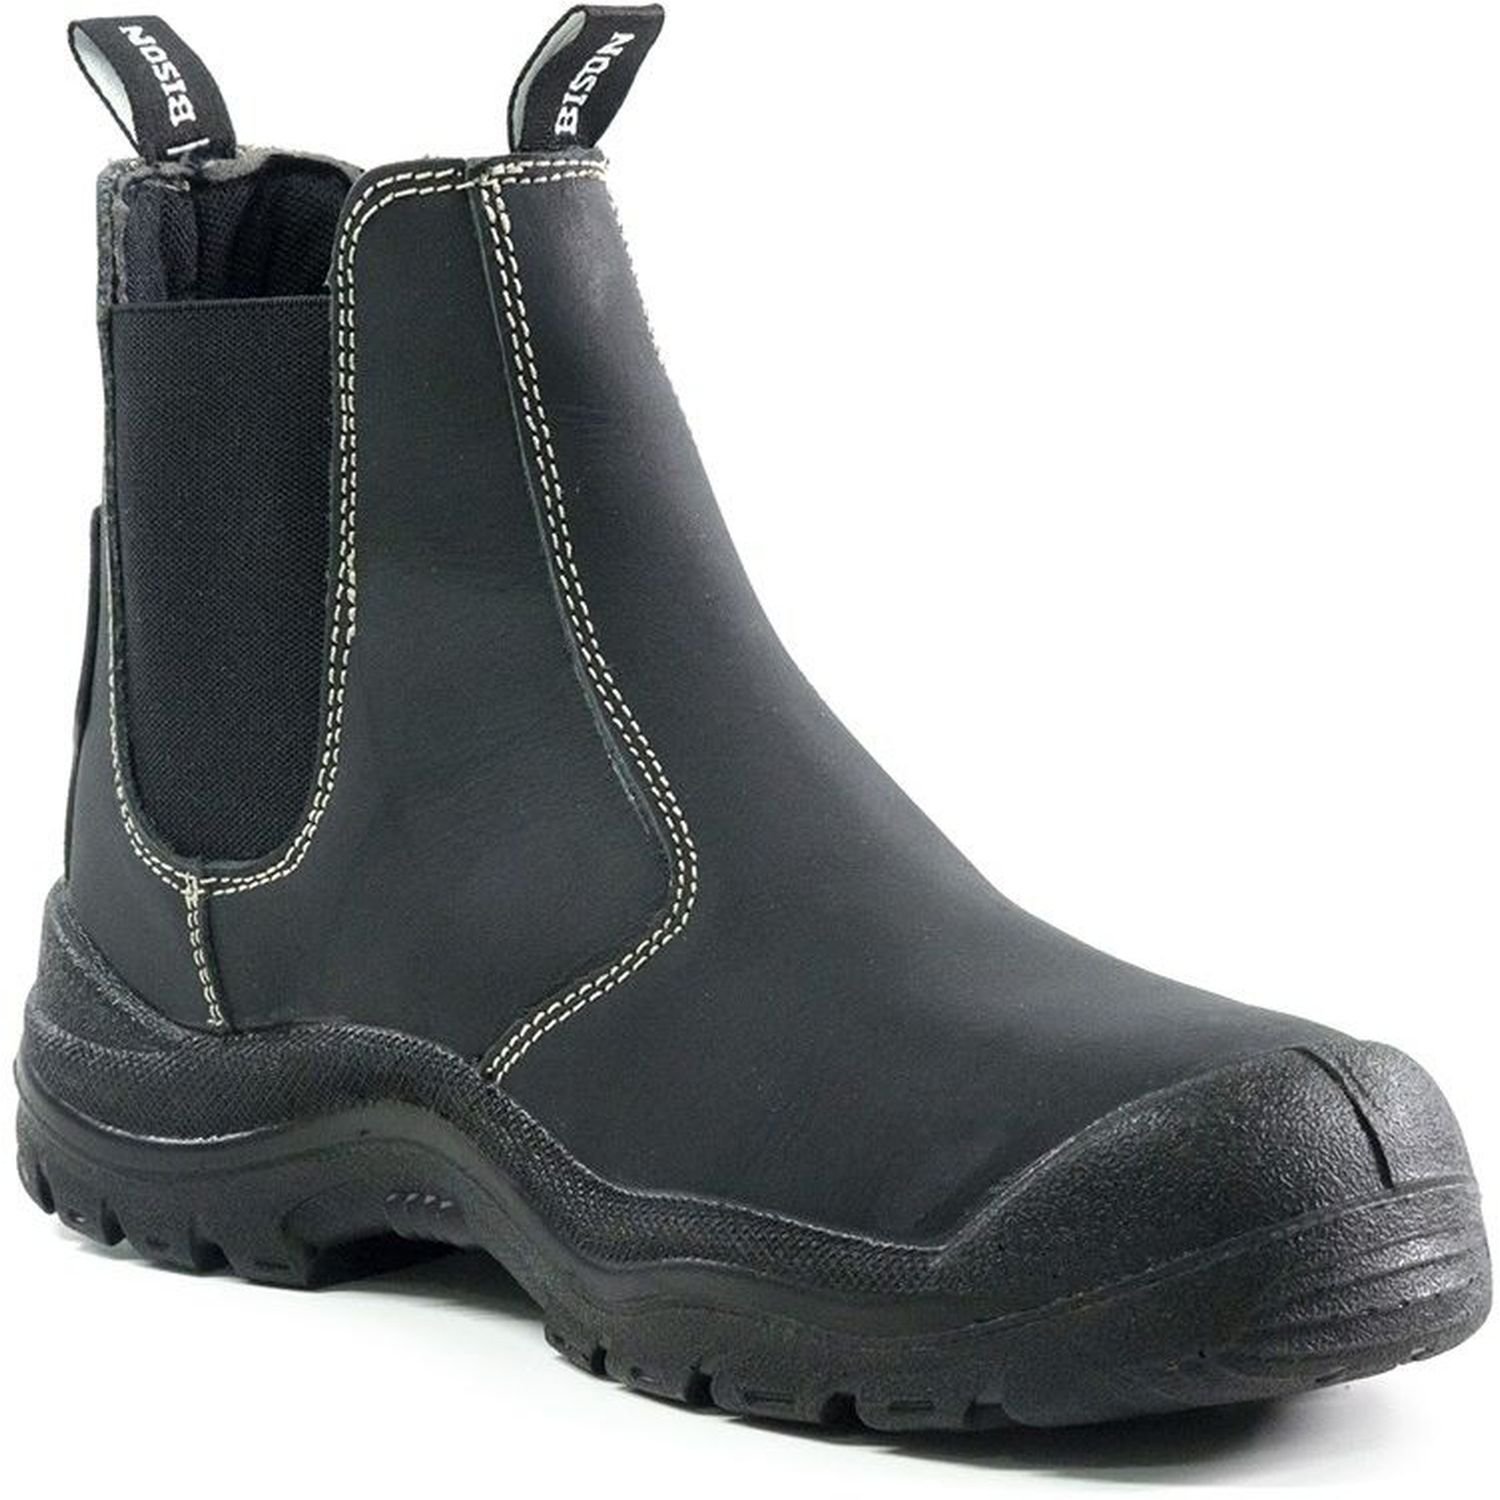 Bison Grizzly Steel Toe Slip On Safety Boot c/w Scuff Cap Black